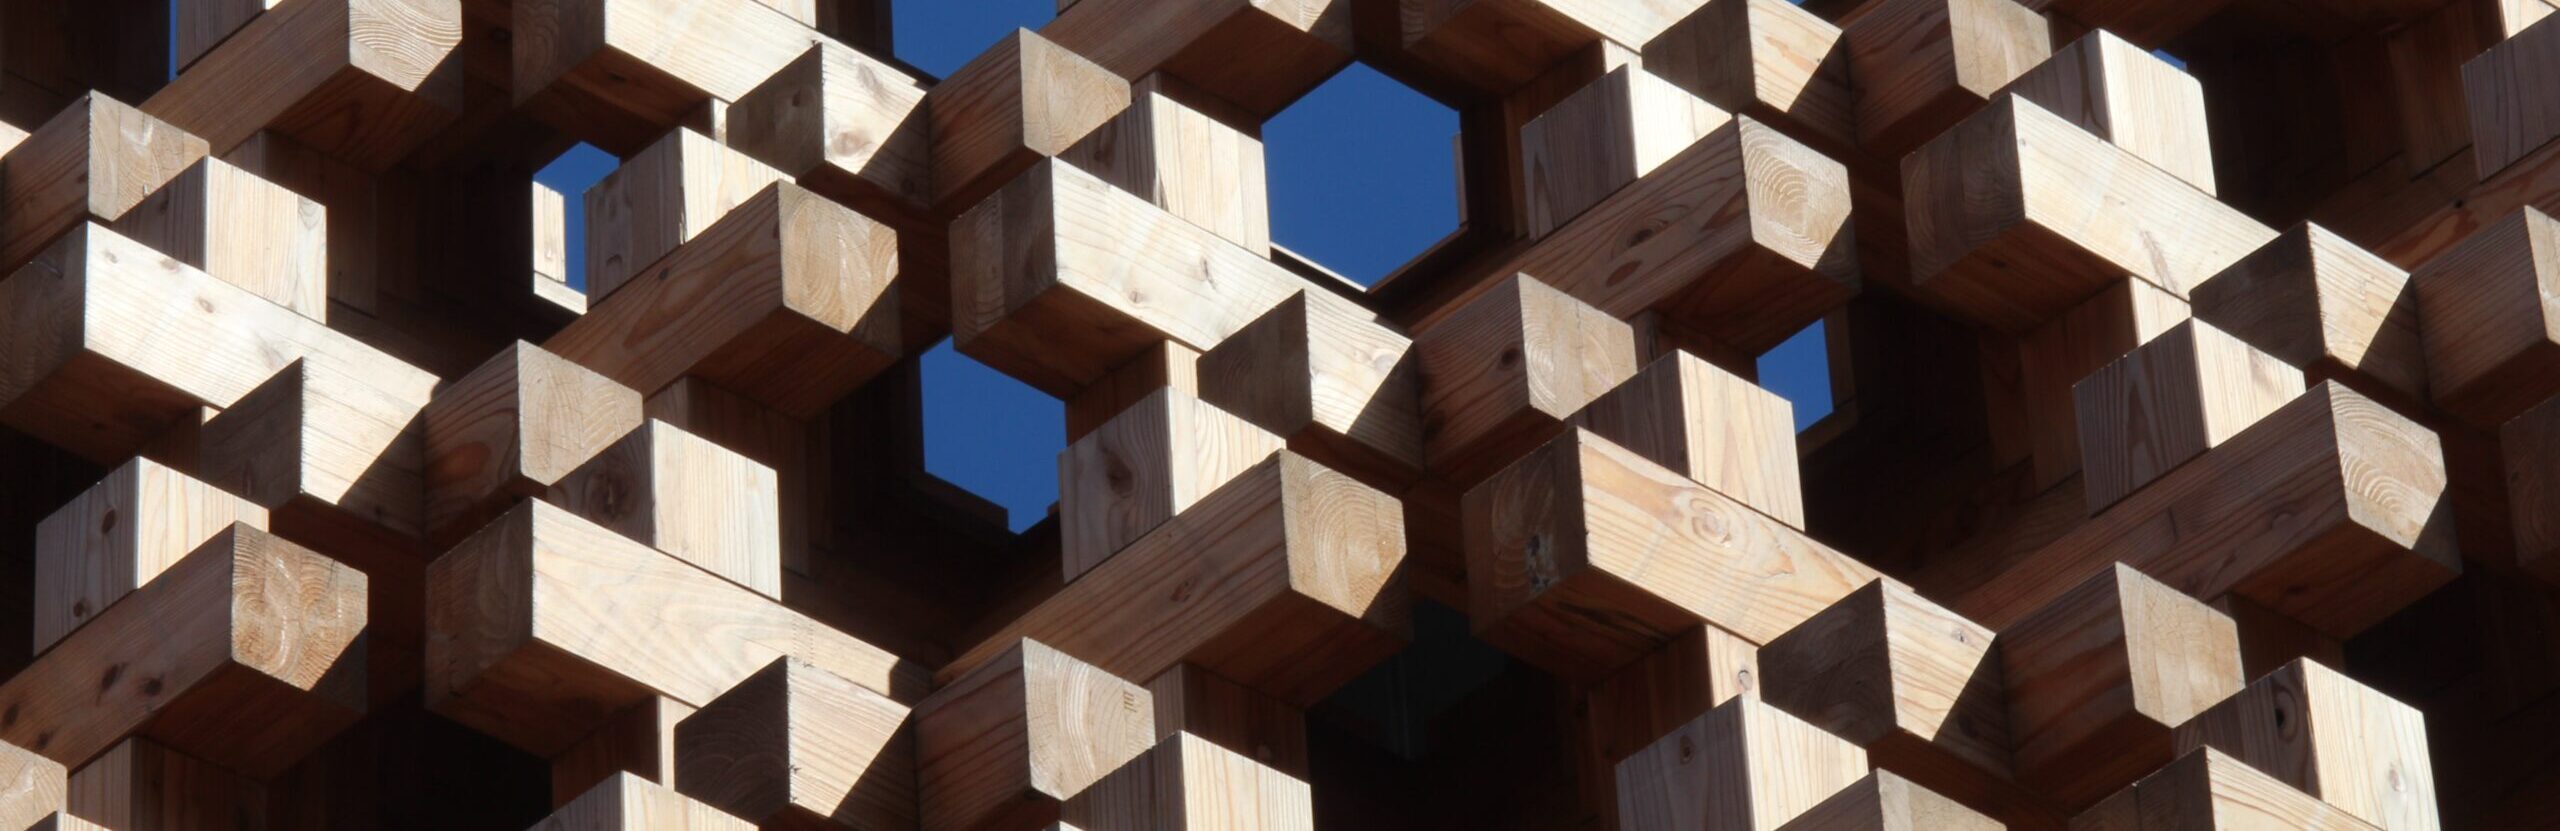 Wooden pieces fit together in an intricate, tessellated outdoor structure. Big projects like these improve the quality of life for the local community.